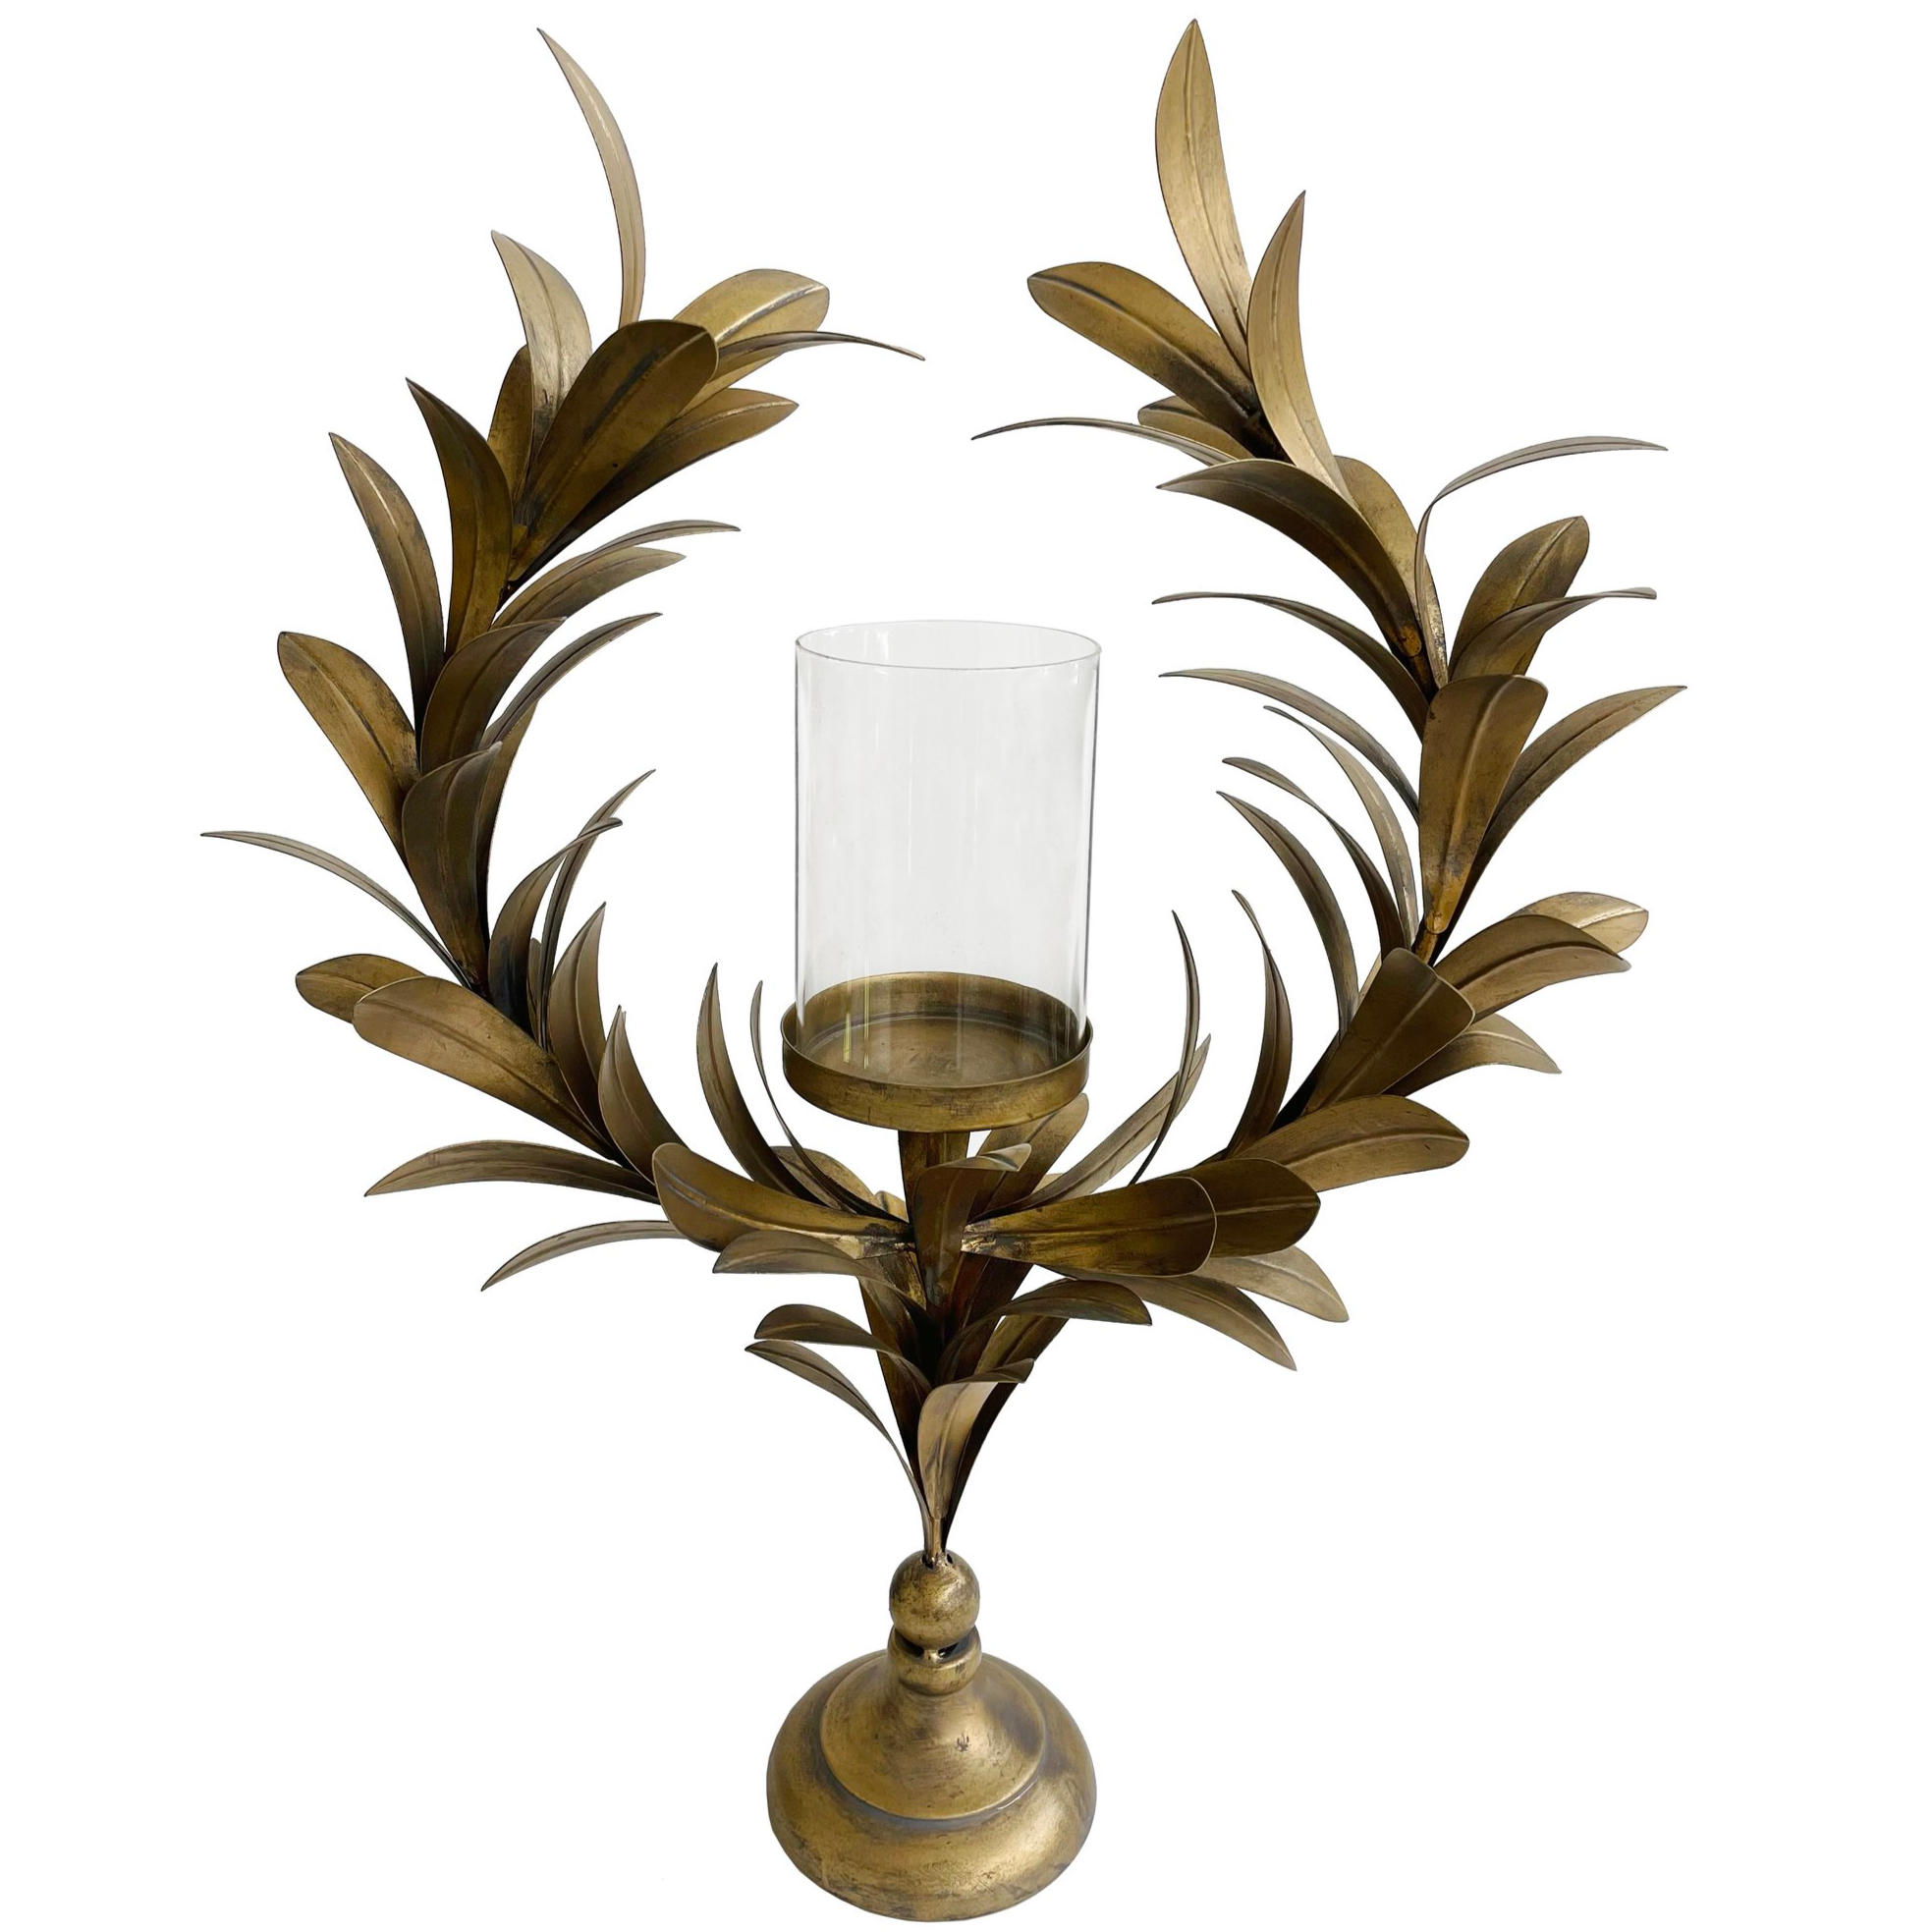 Metal Wreath Antique Gold Candleholder with Glass Cup